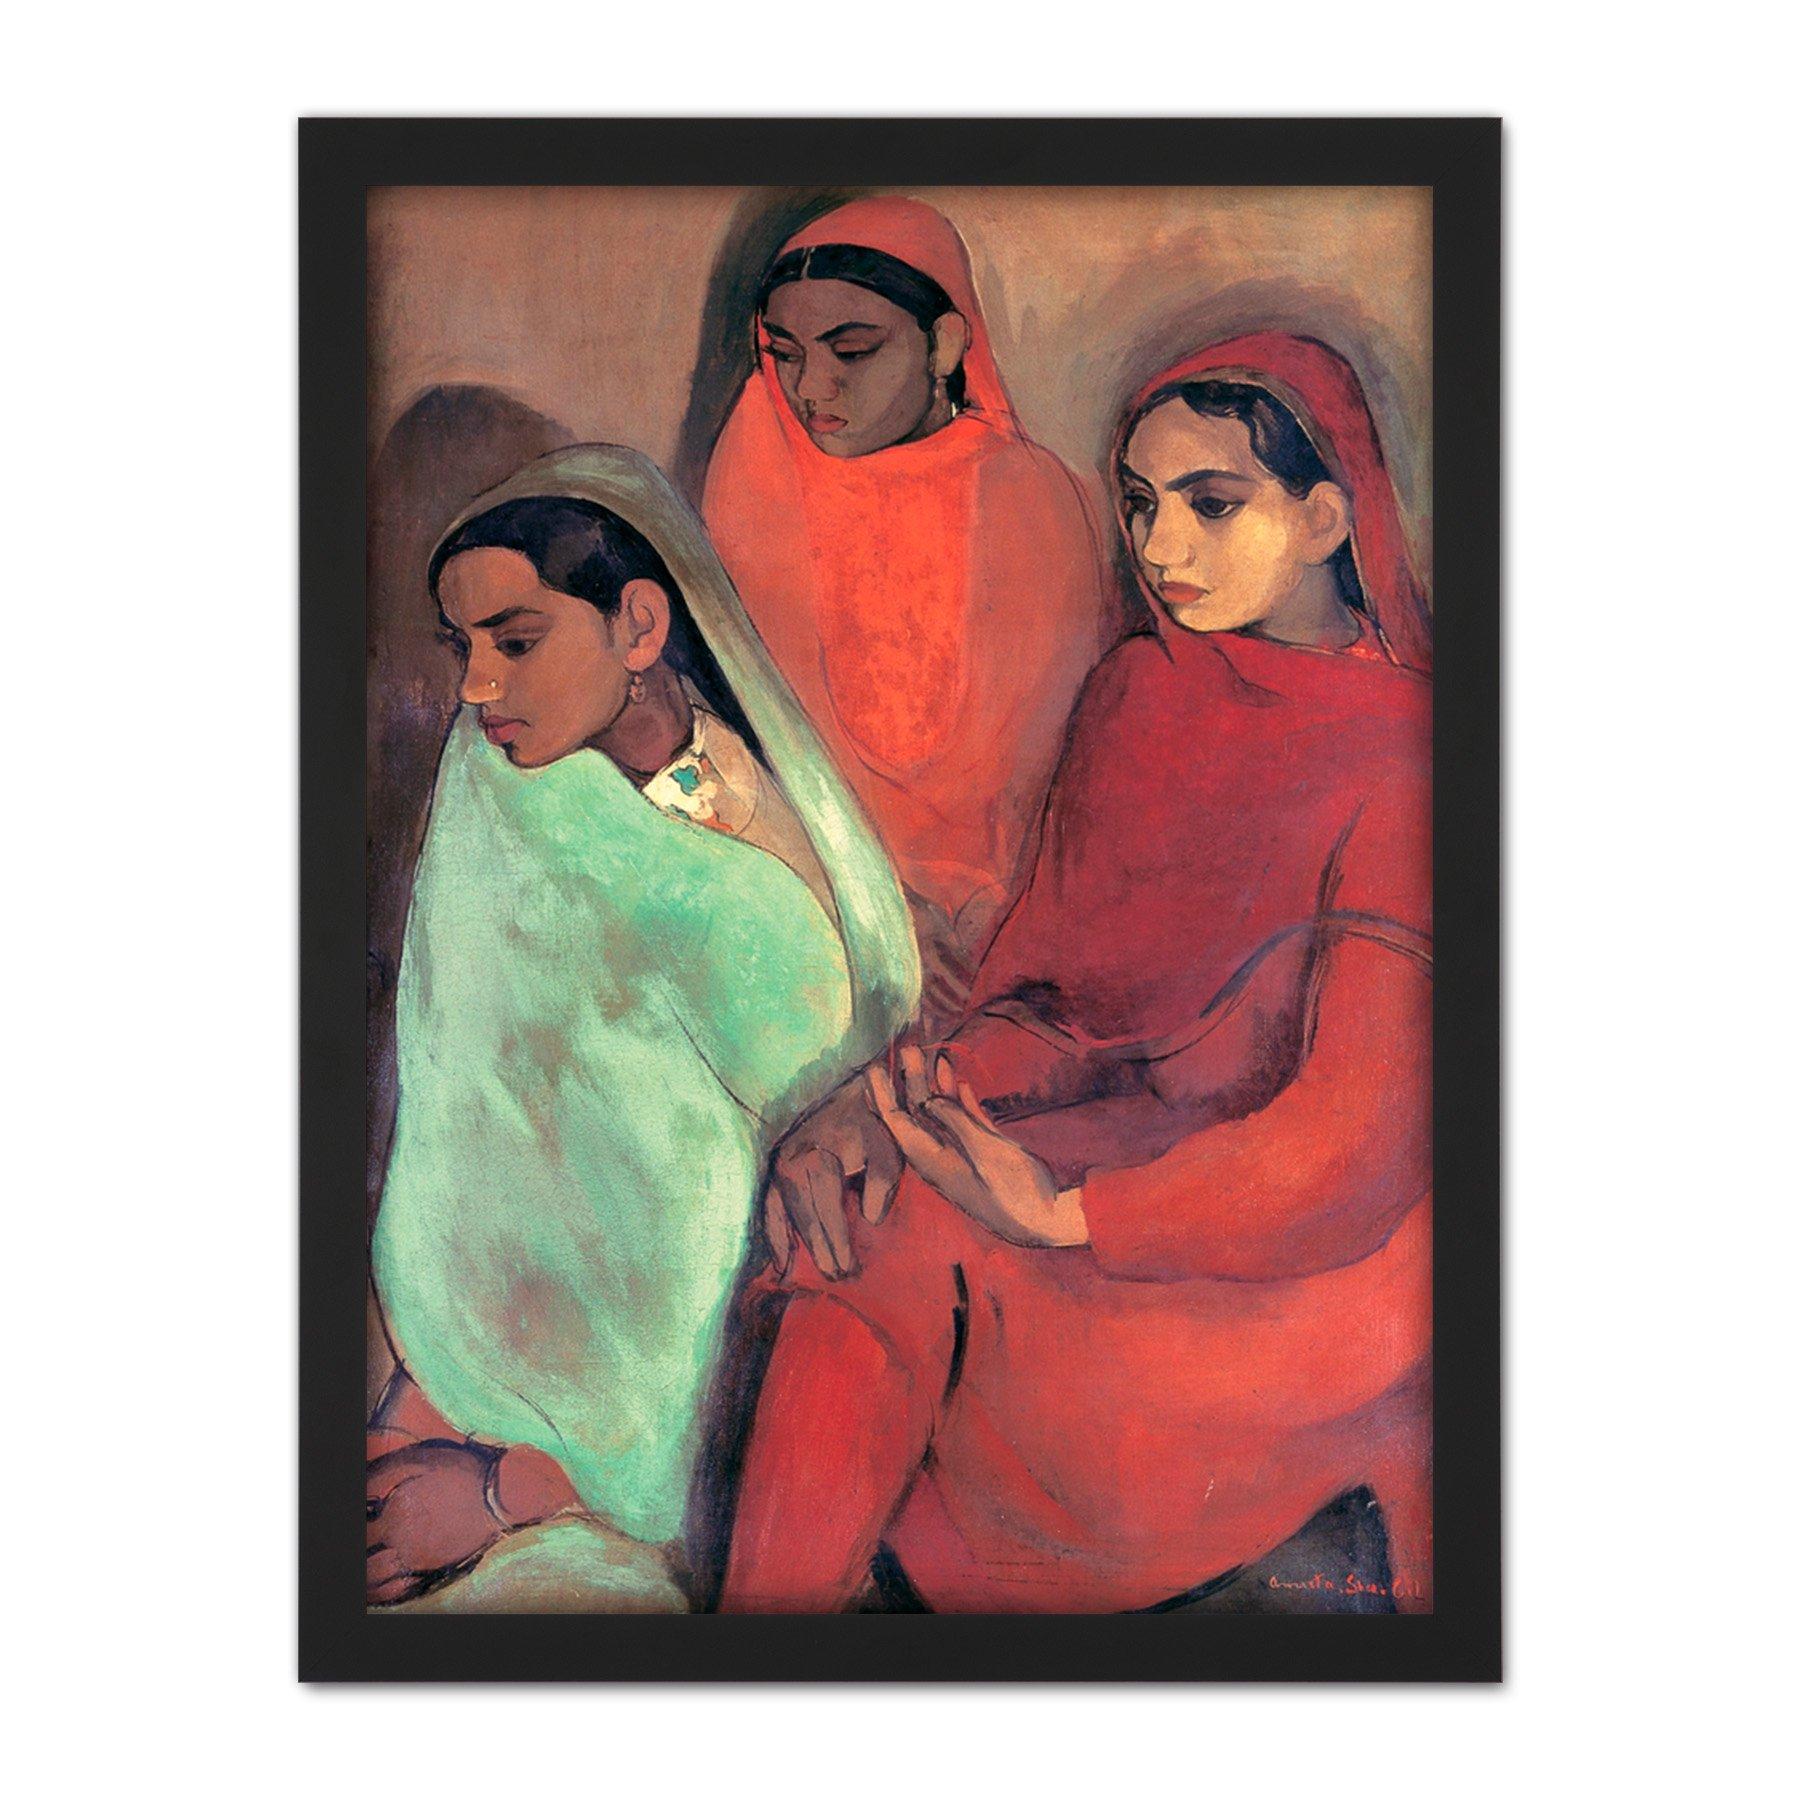 Sher-Gil Group Of Three Girls Indian Painting Large Framed Wall Decor Art Print